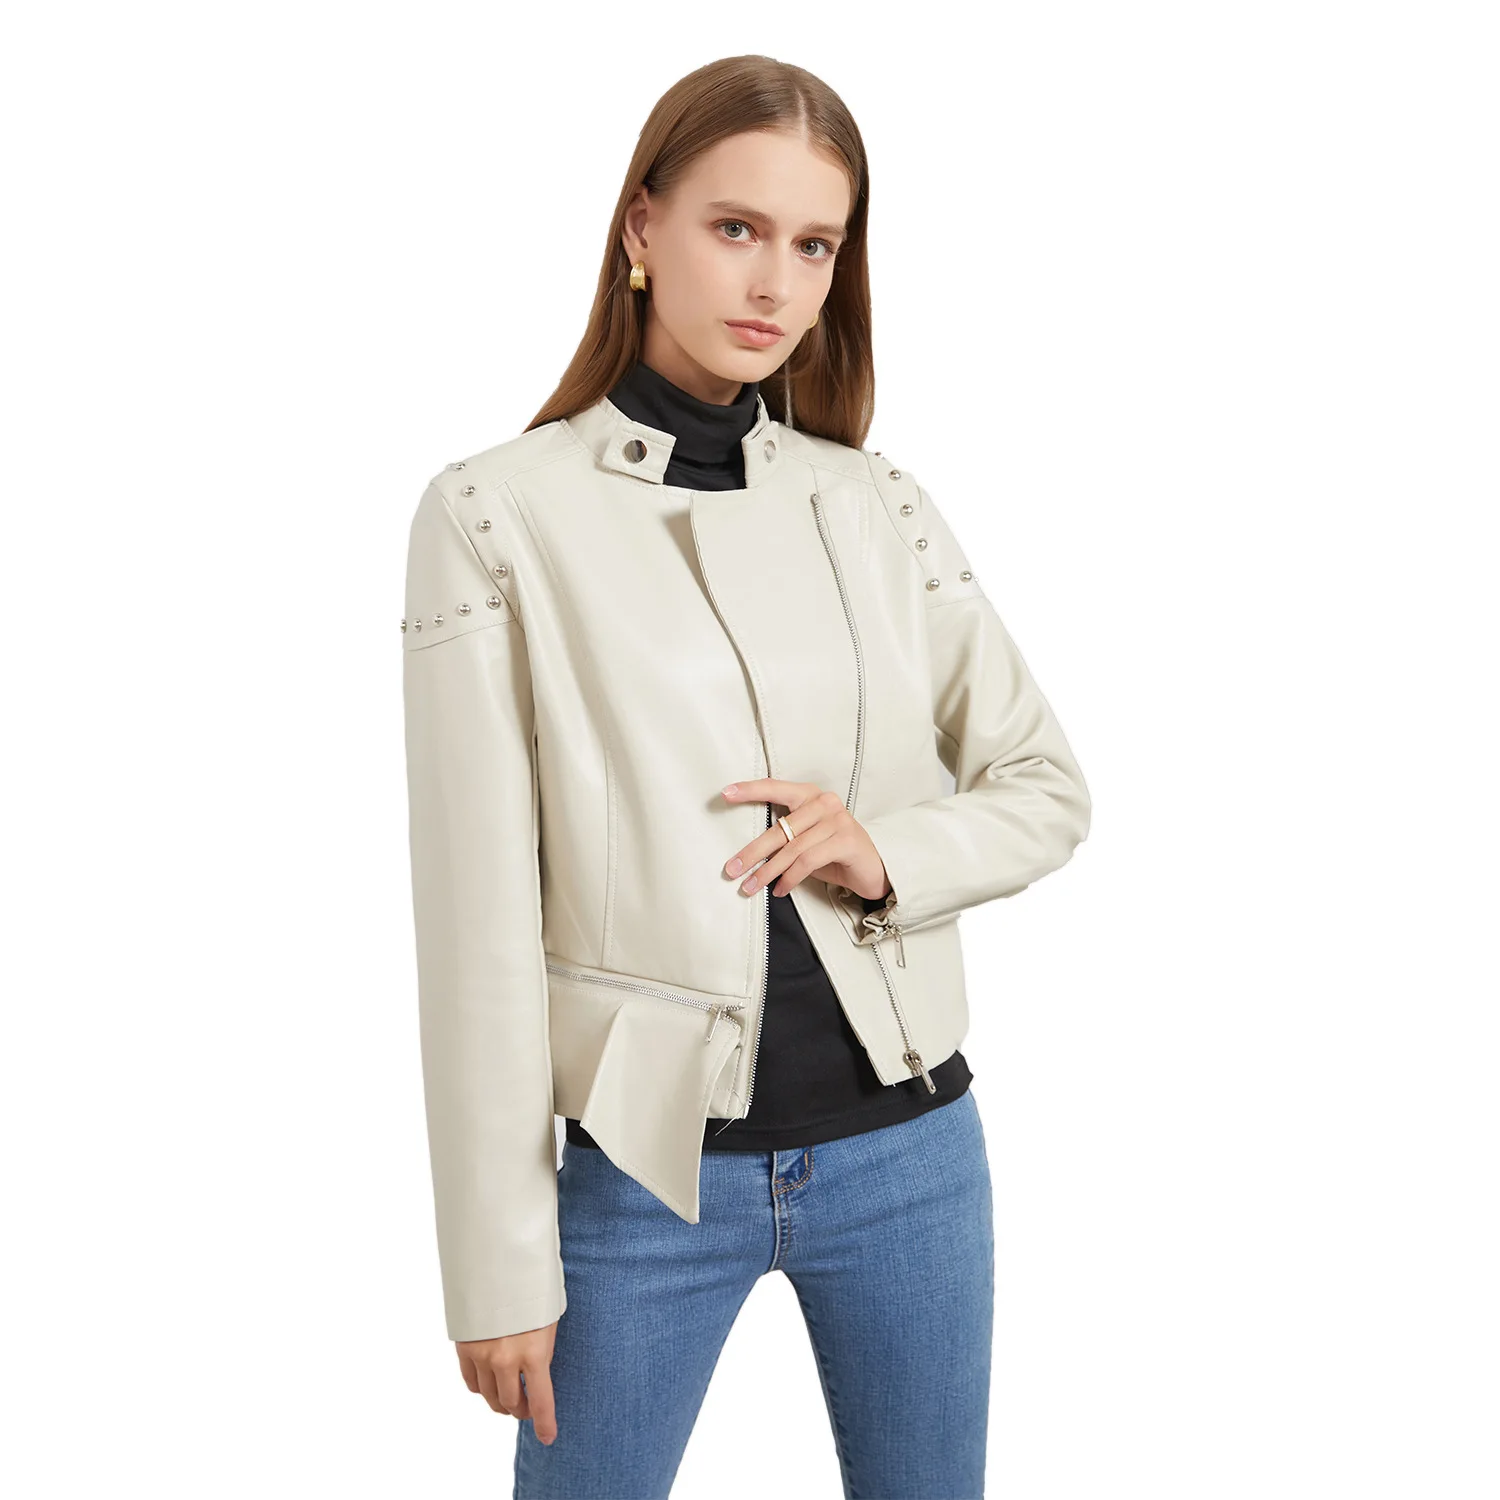 2021 New Rivet Fashion Stand Collar Leather Clothes Women's Solid Color Jacket Lddy's Spring And Autumn Coat Women's Irregular korean spring and autumn 2021 new solid color stand collar slim fit boy jacket teenagers and winter large men